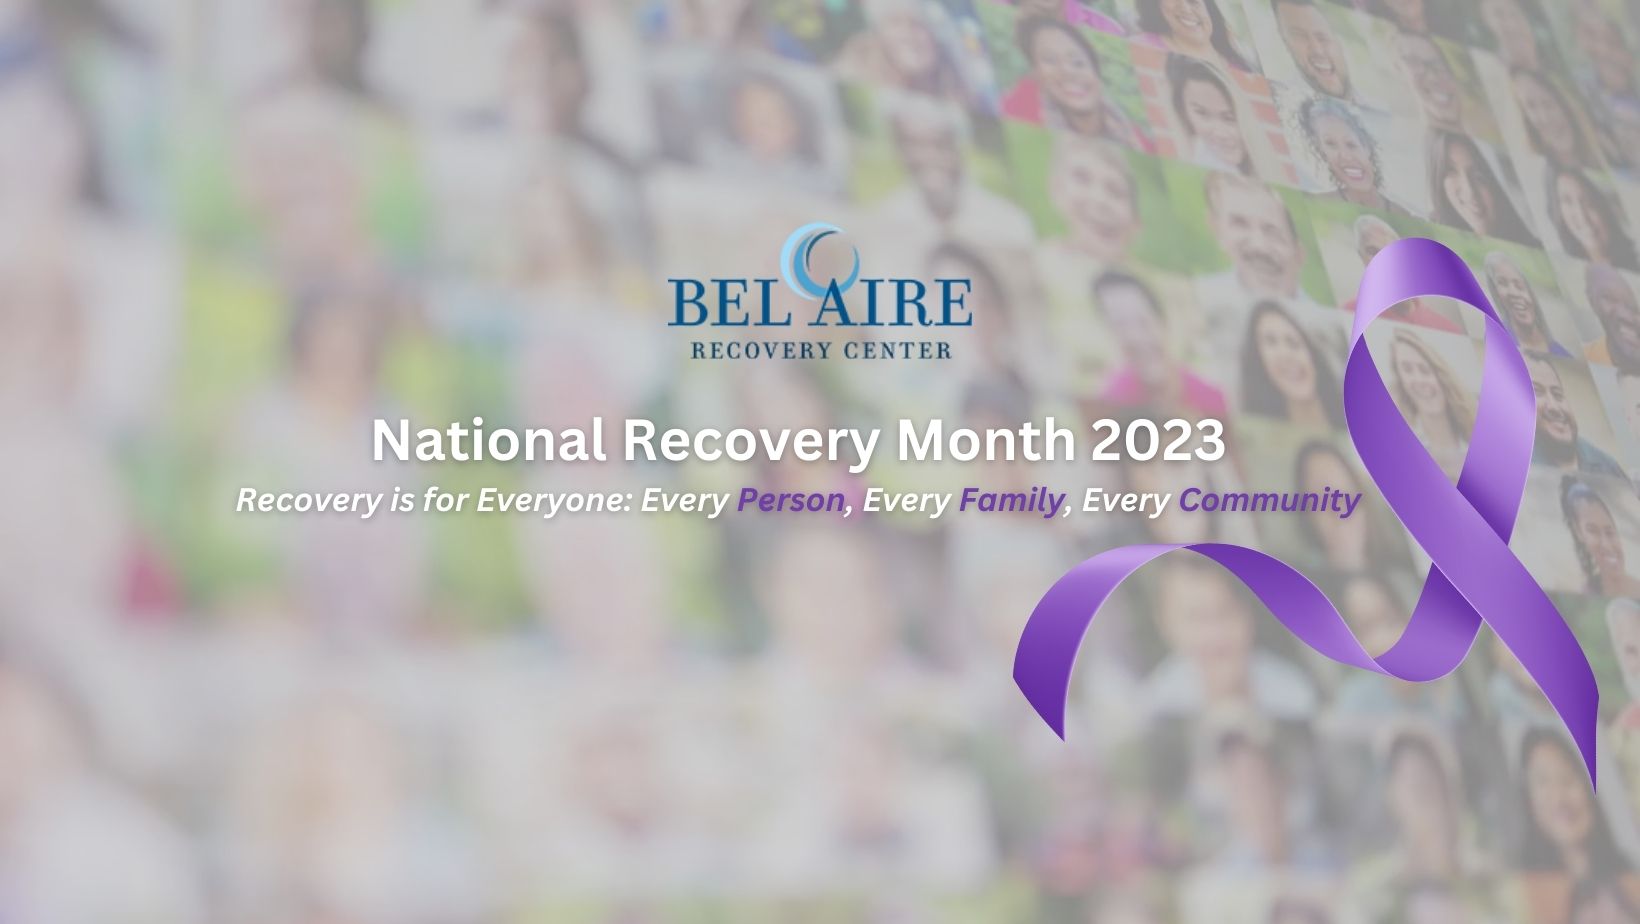 September is a Month for Celebrating Recovery